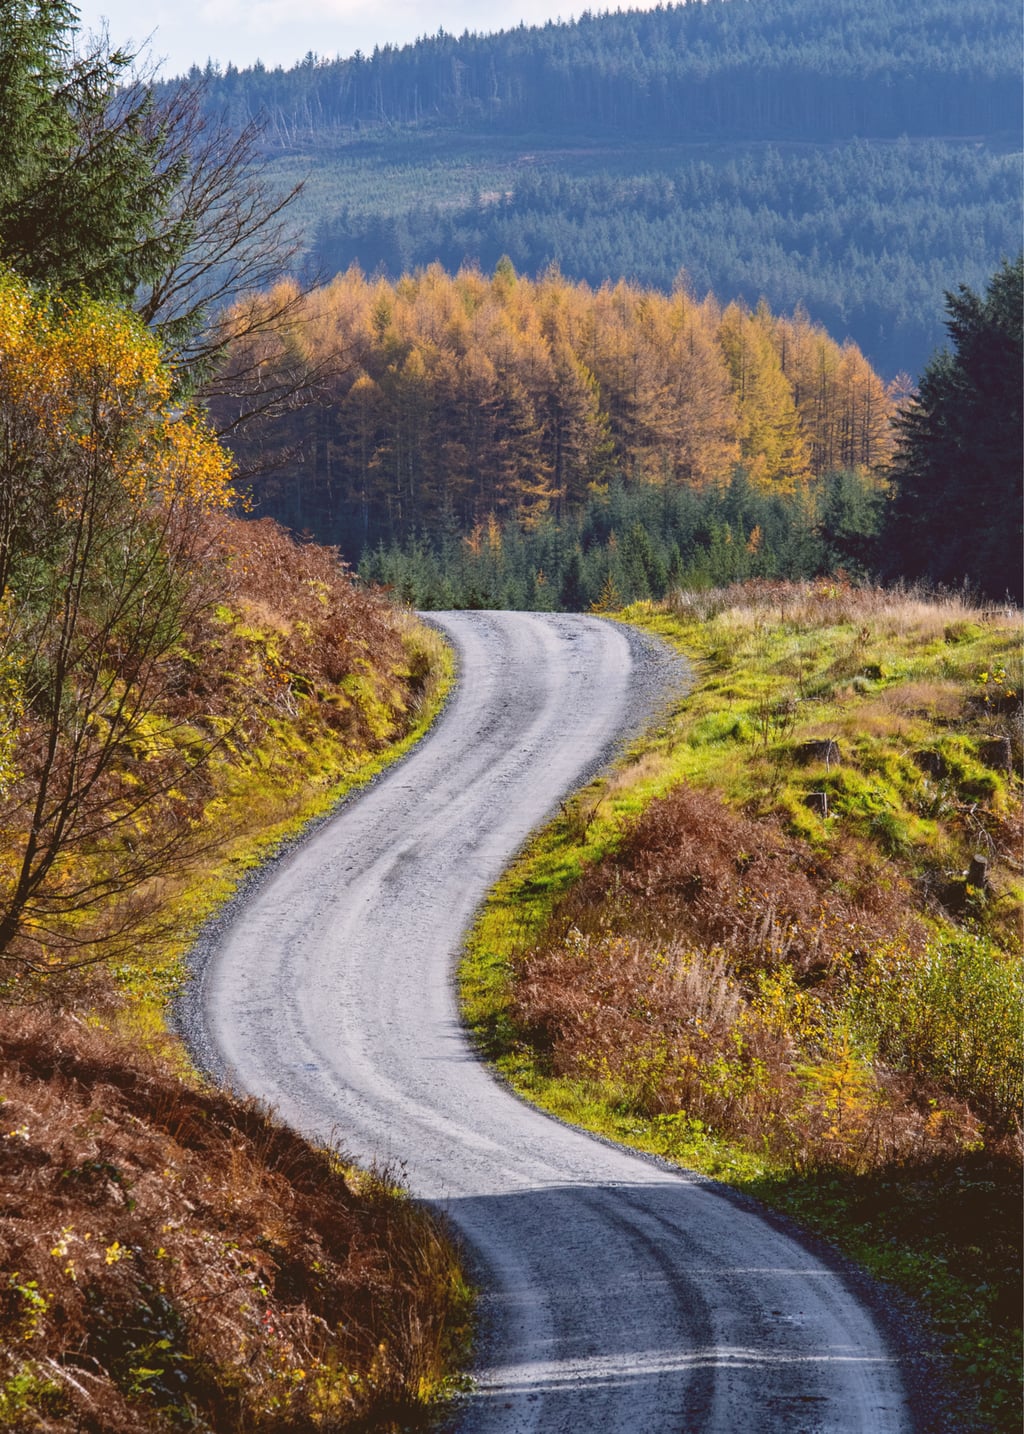 The Raiders Road in the Galloway Forest Park during the autumn season